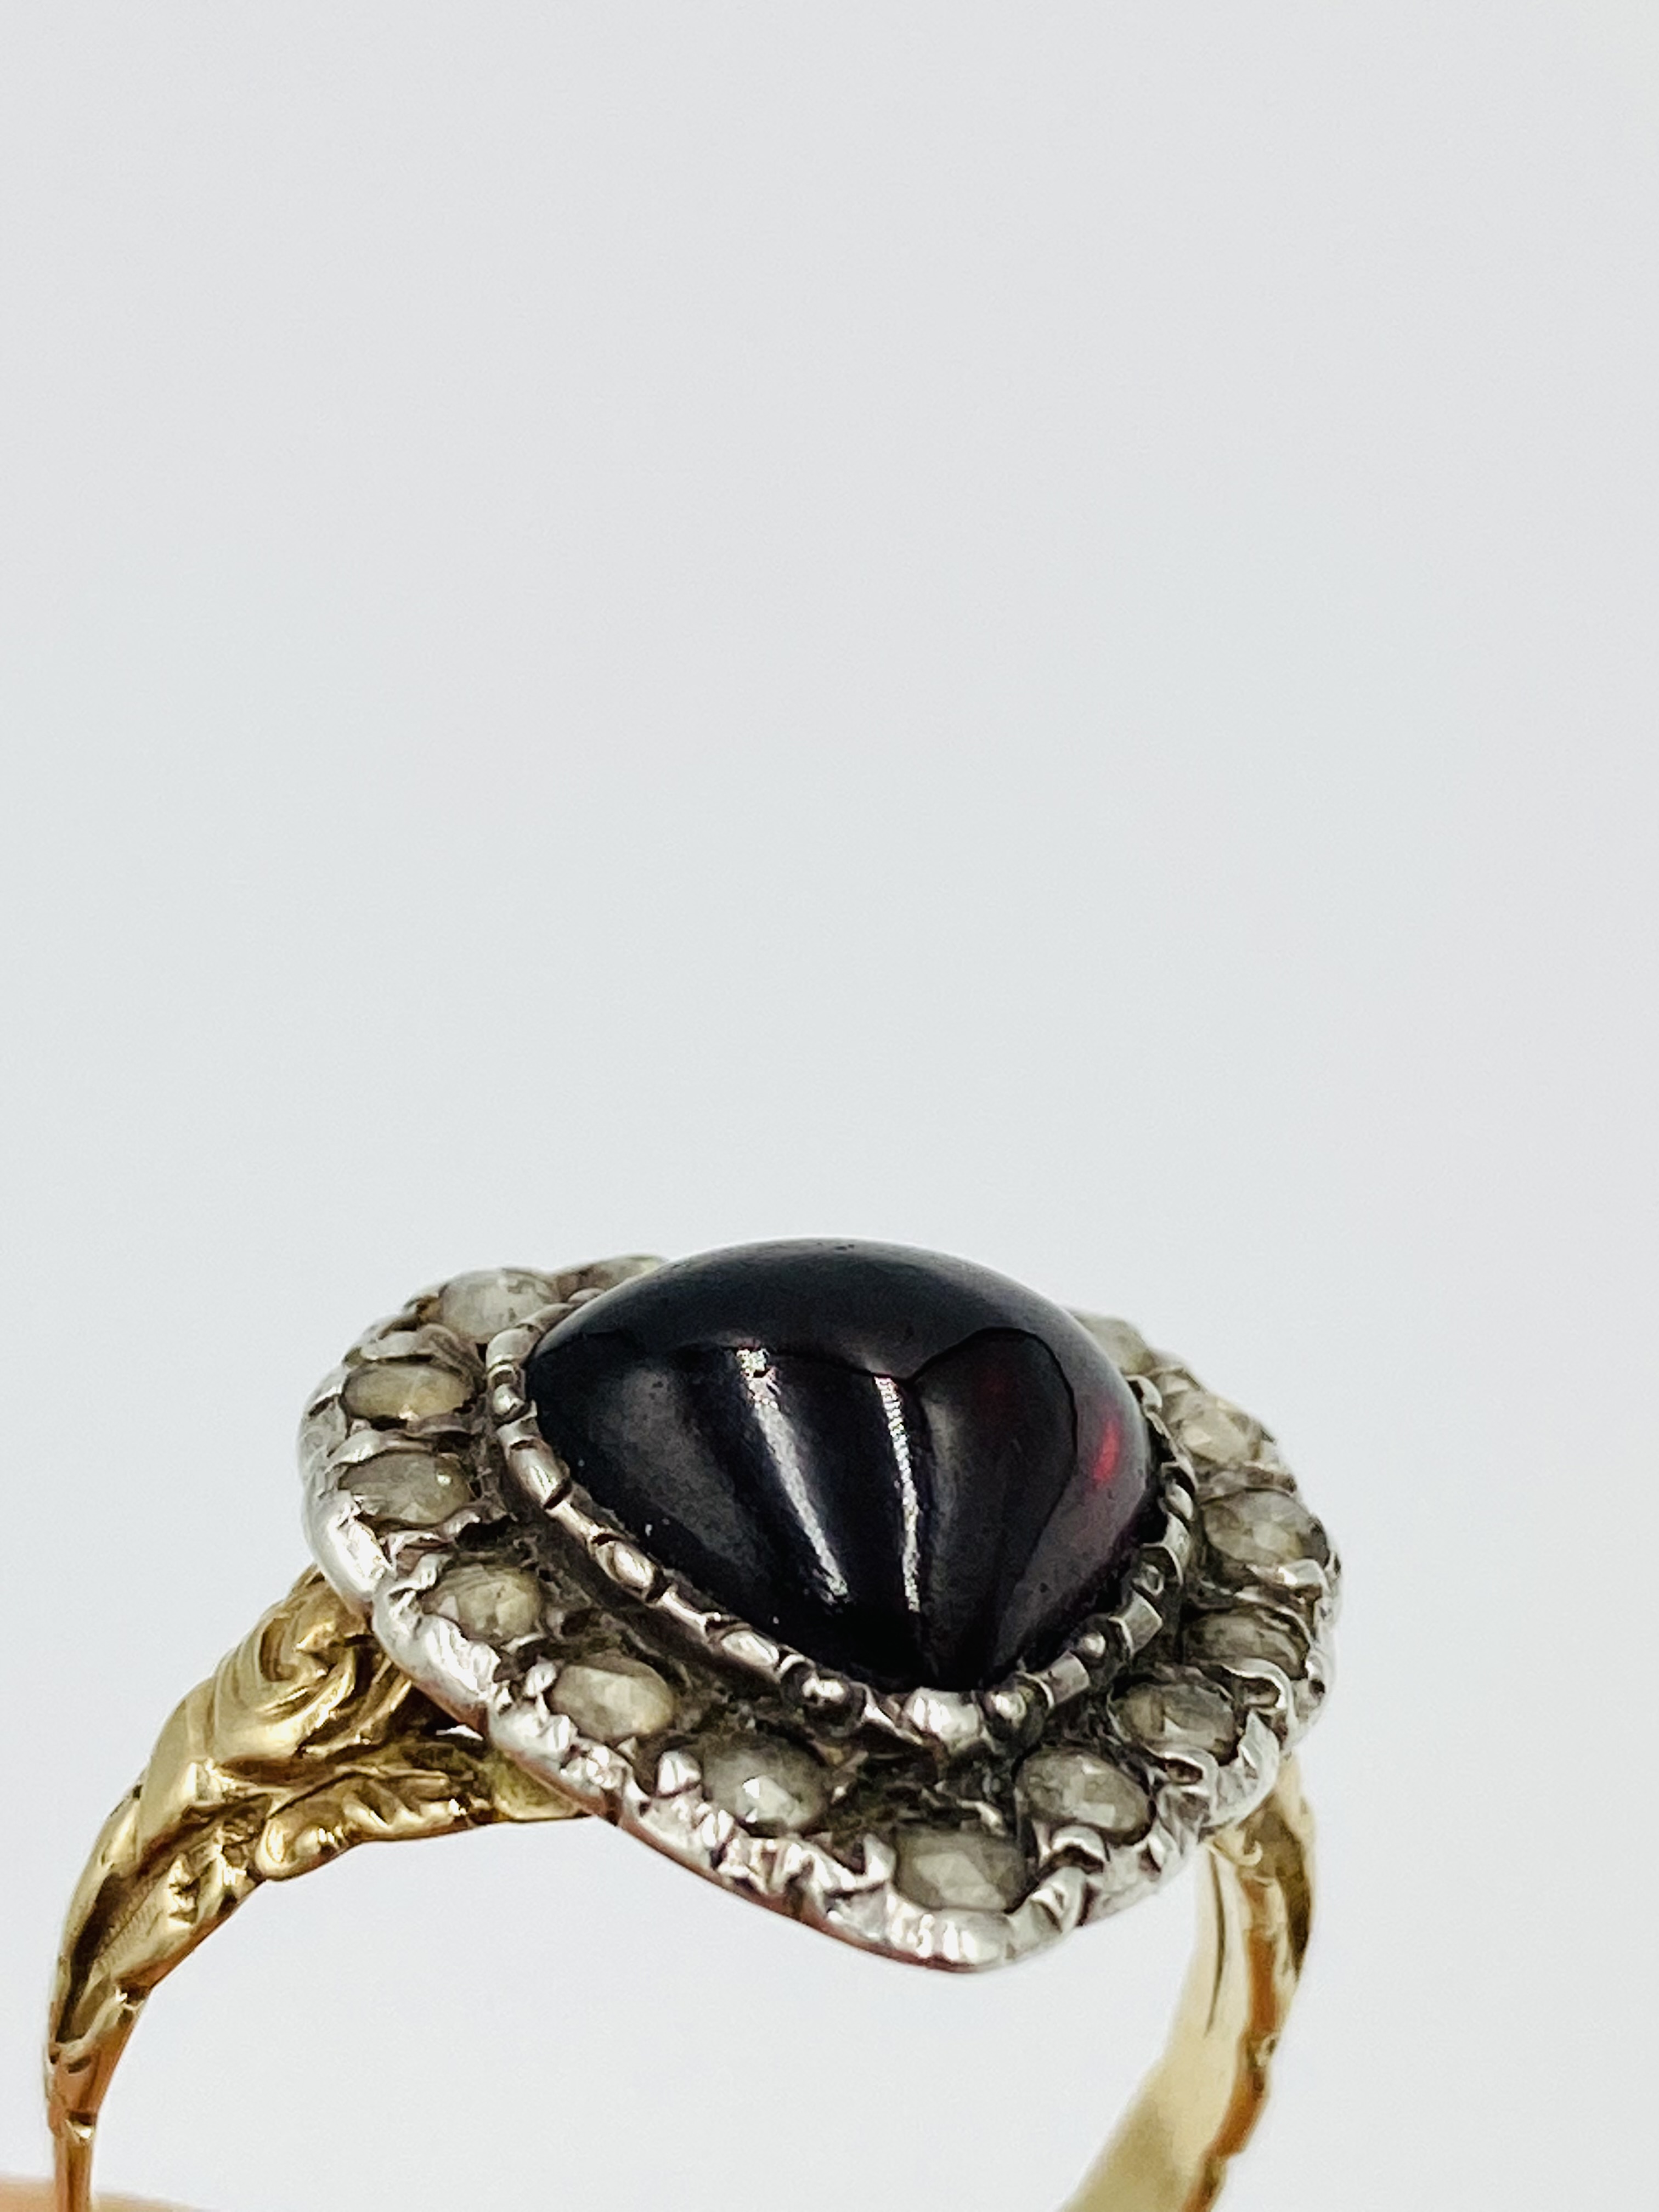 Gold and platinum set diamond and garnet heart shaped ring - Image 5 of 5